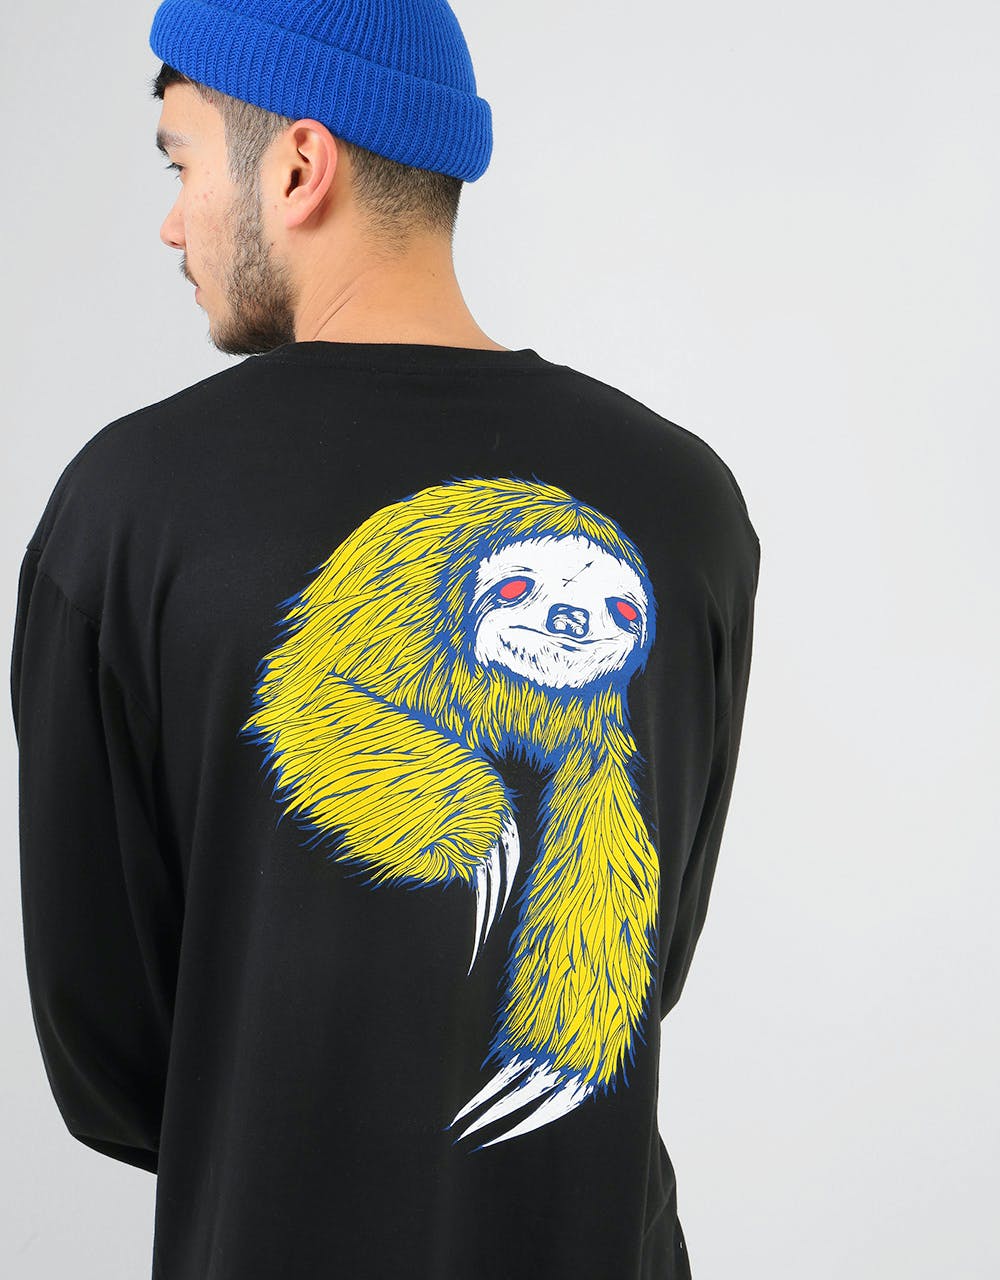 Welcome Sloth L/S T-Shirt - Black/Blue/Yellow